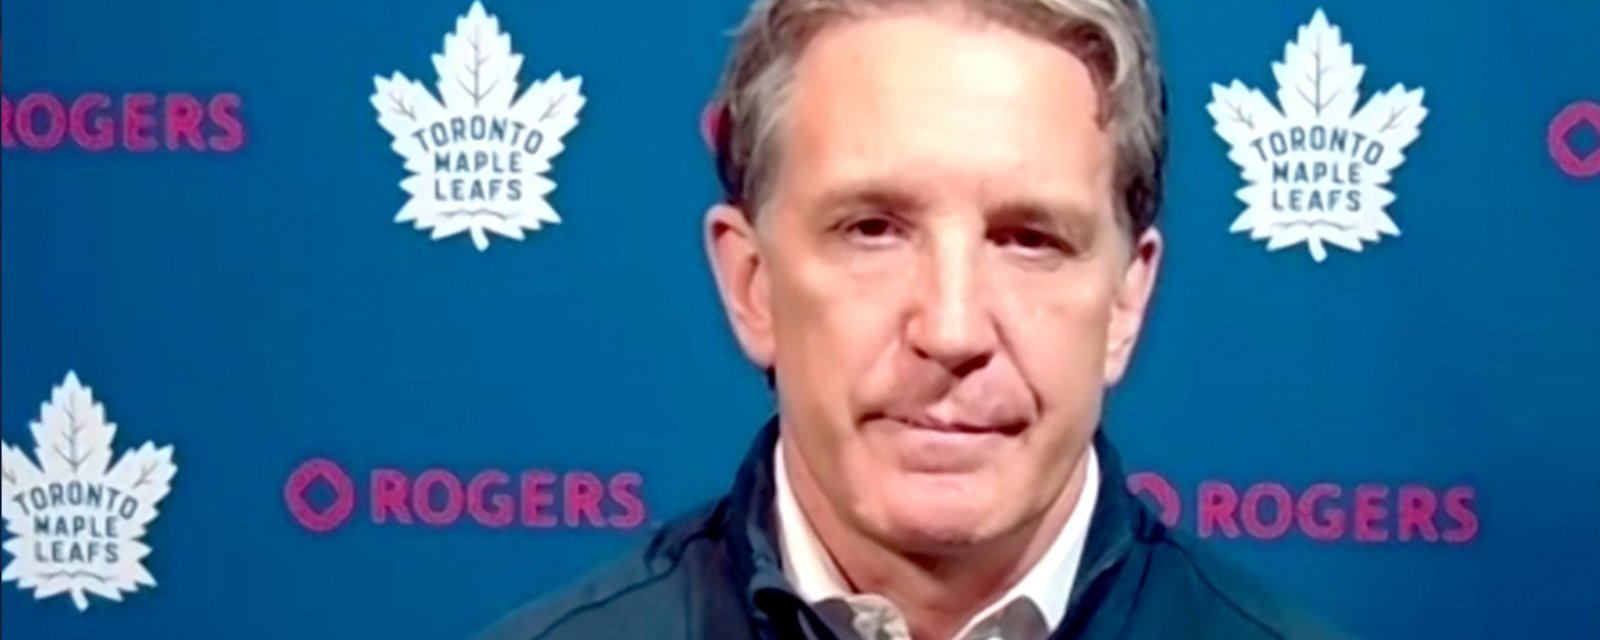 Brendan Shanahan: “There will be changes.”